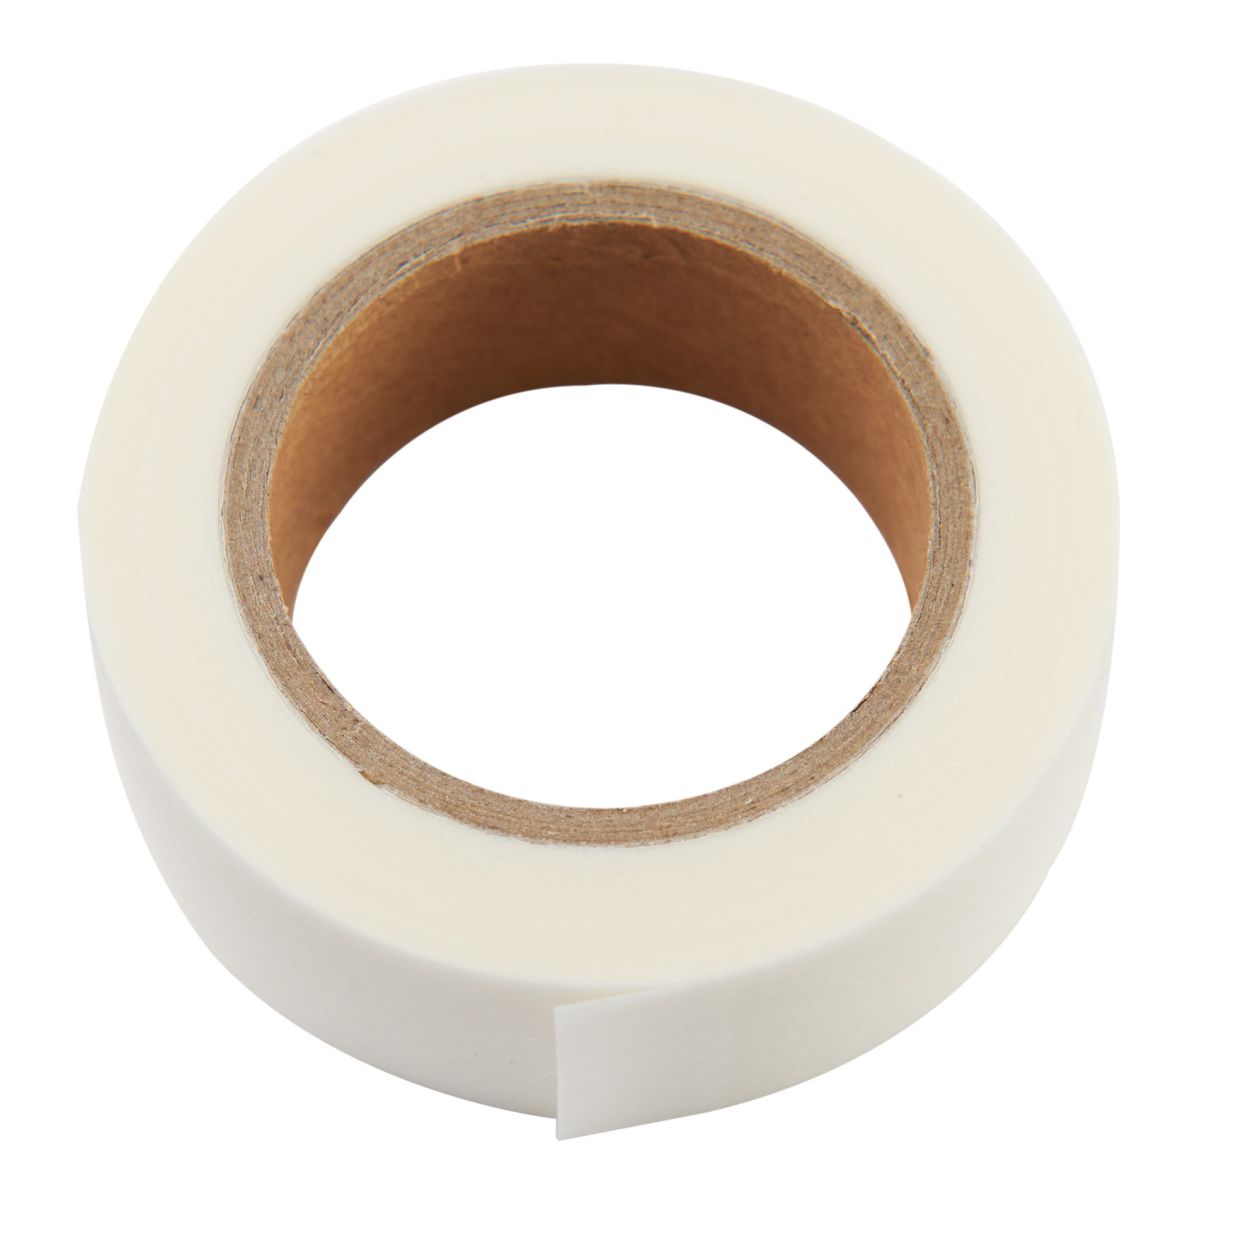 0.7 Masking Tape,Drafting Tape,Beige White Color India